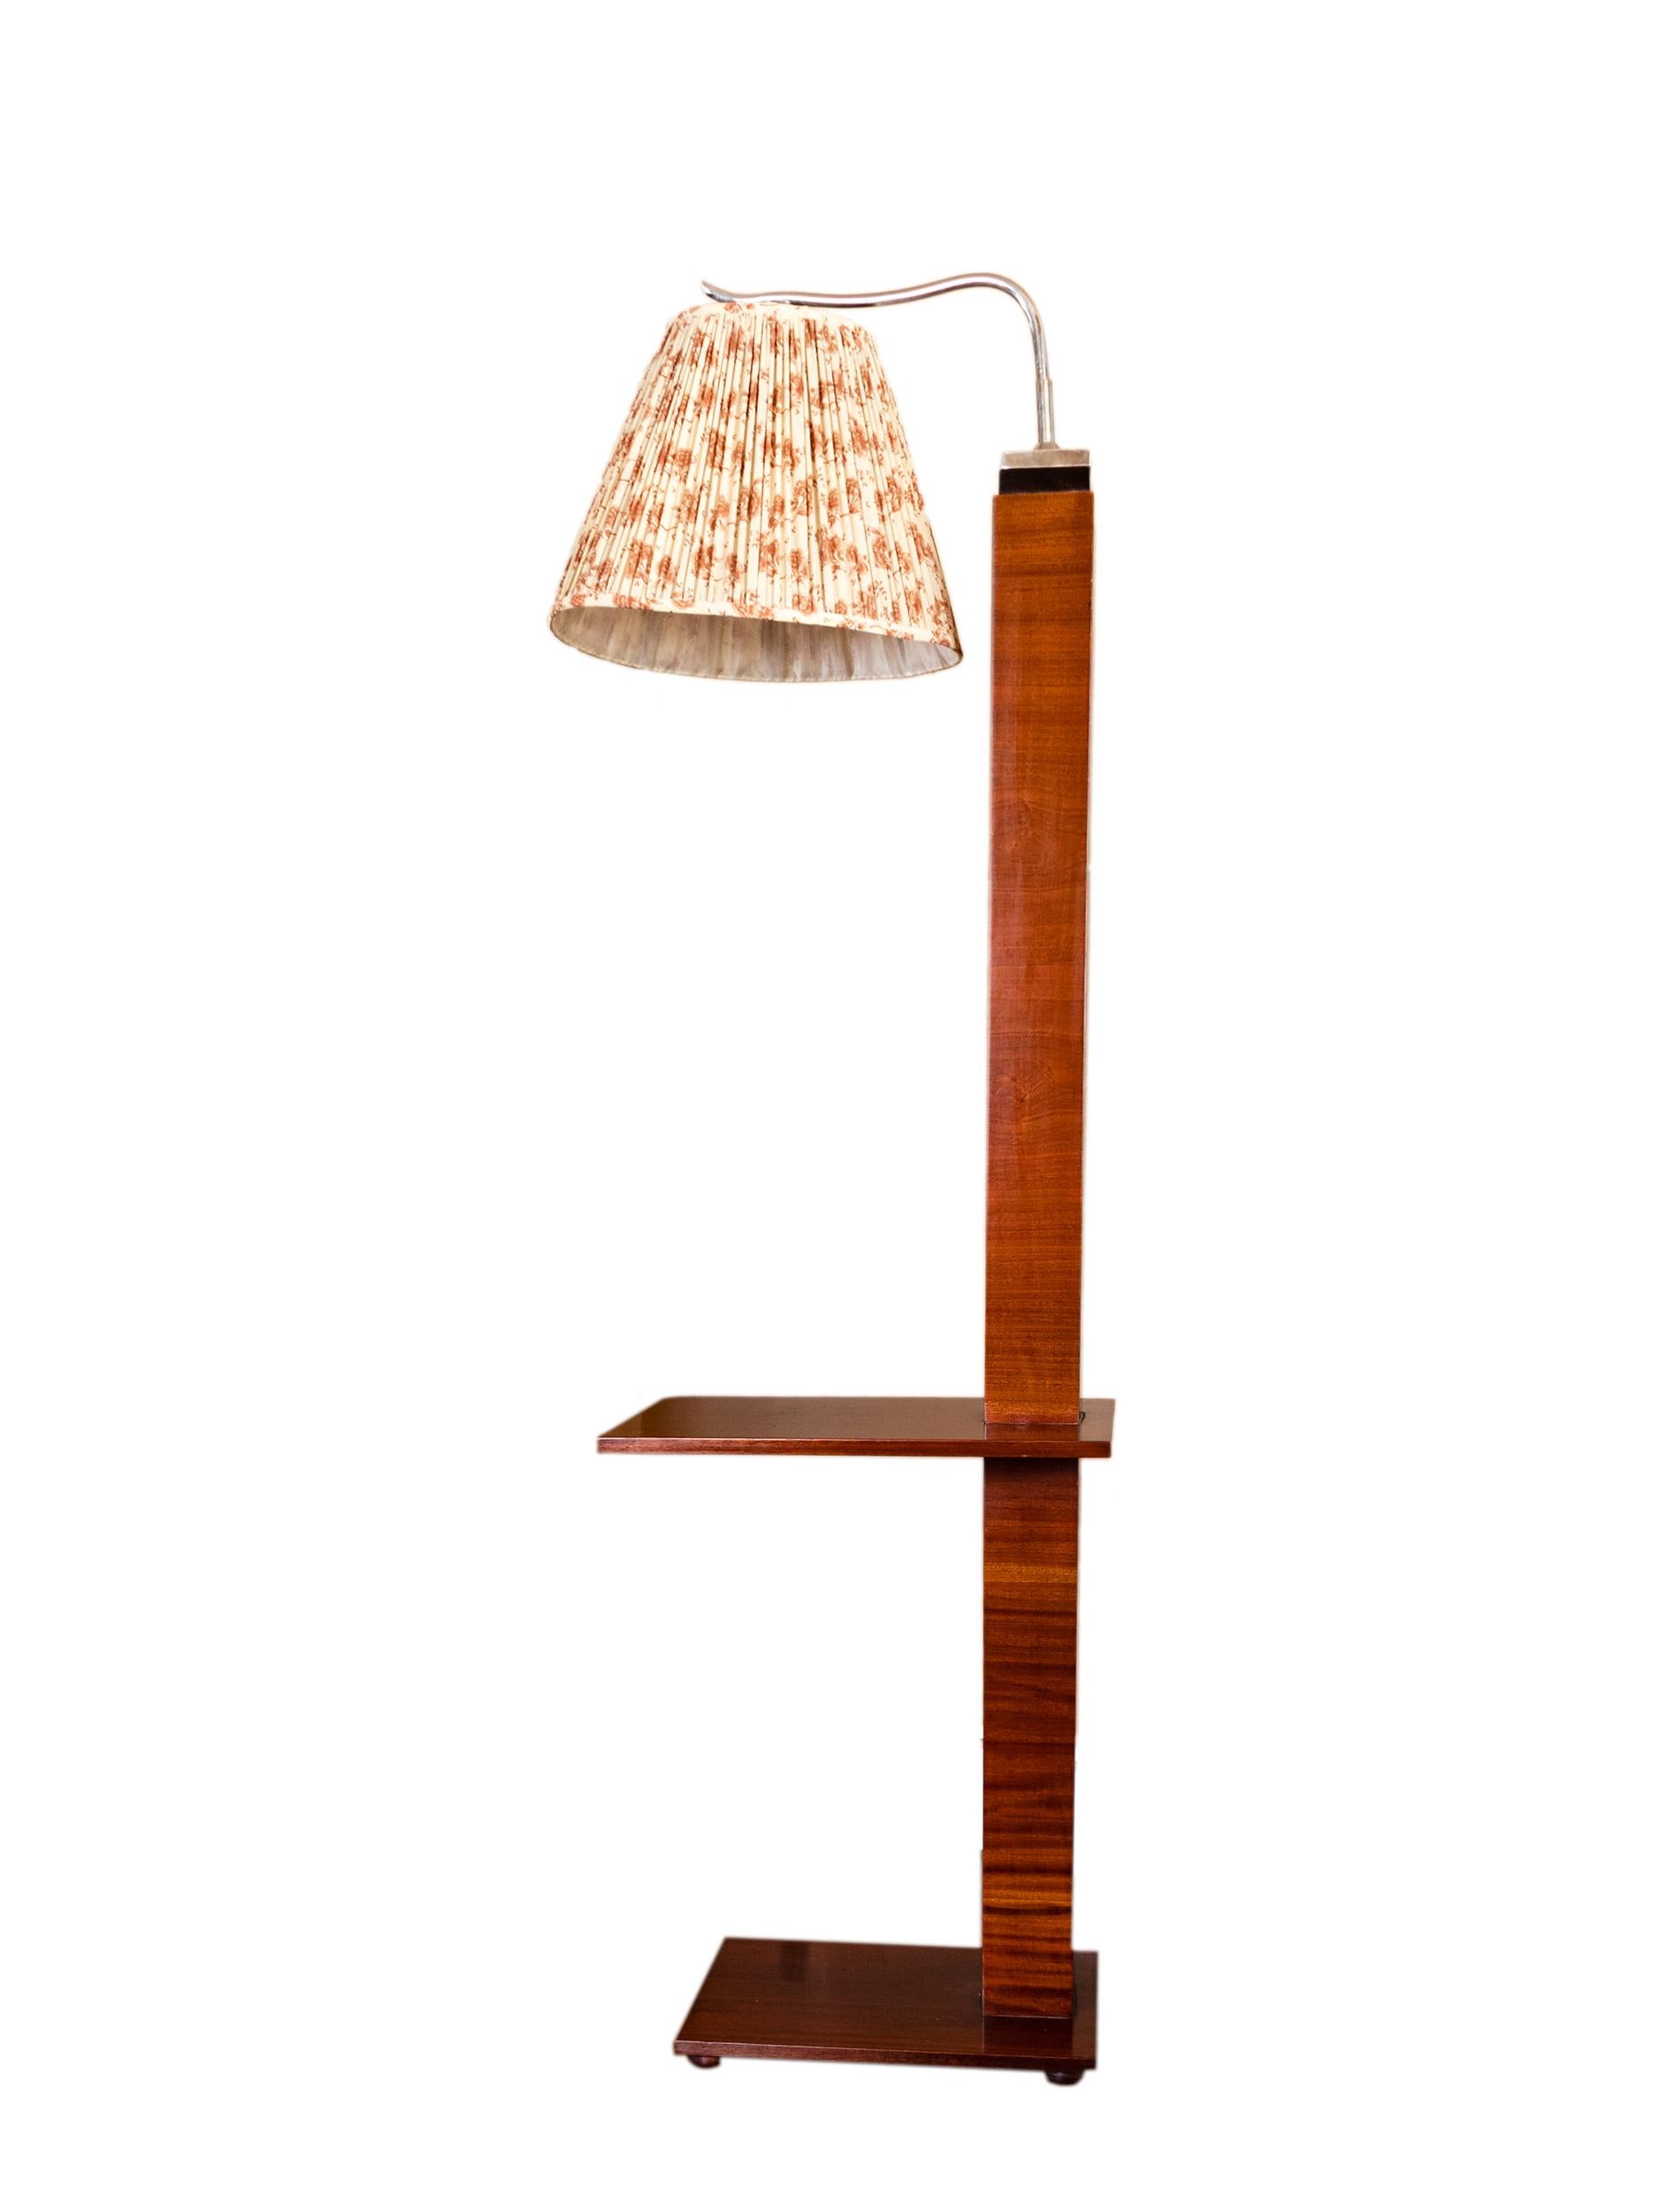  French Art Deco Floor Lamp, 20th Century For Sale 7